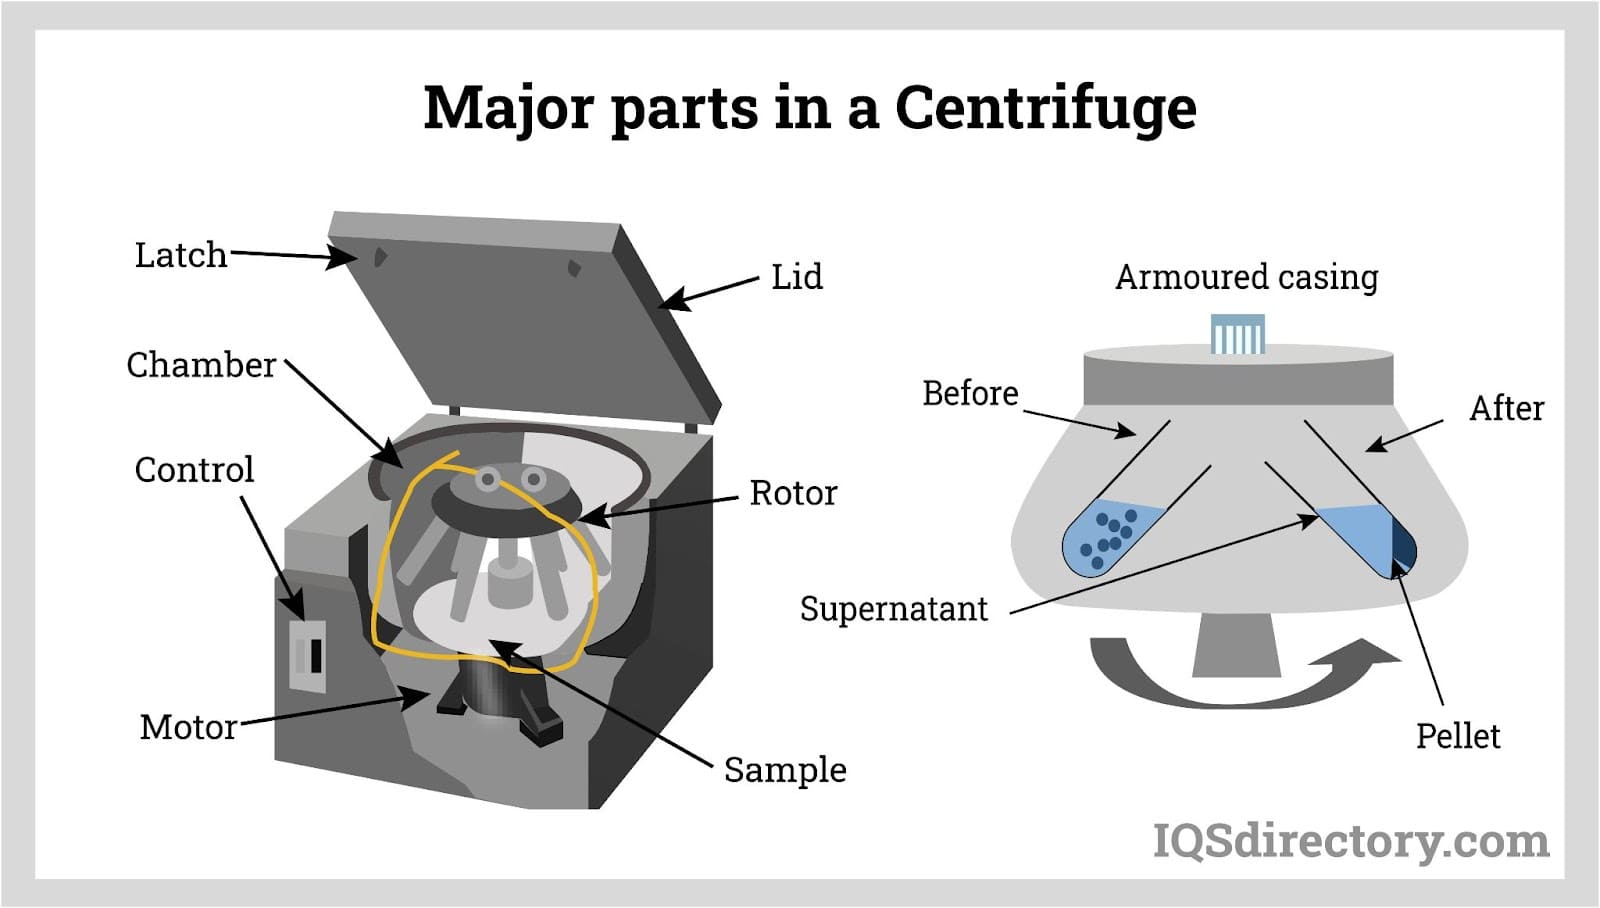 Major parts in a Centrifuge